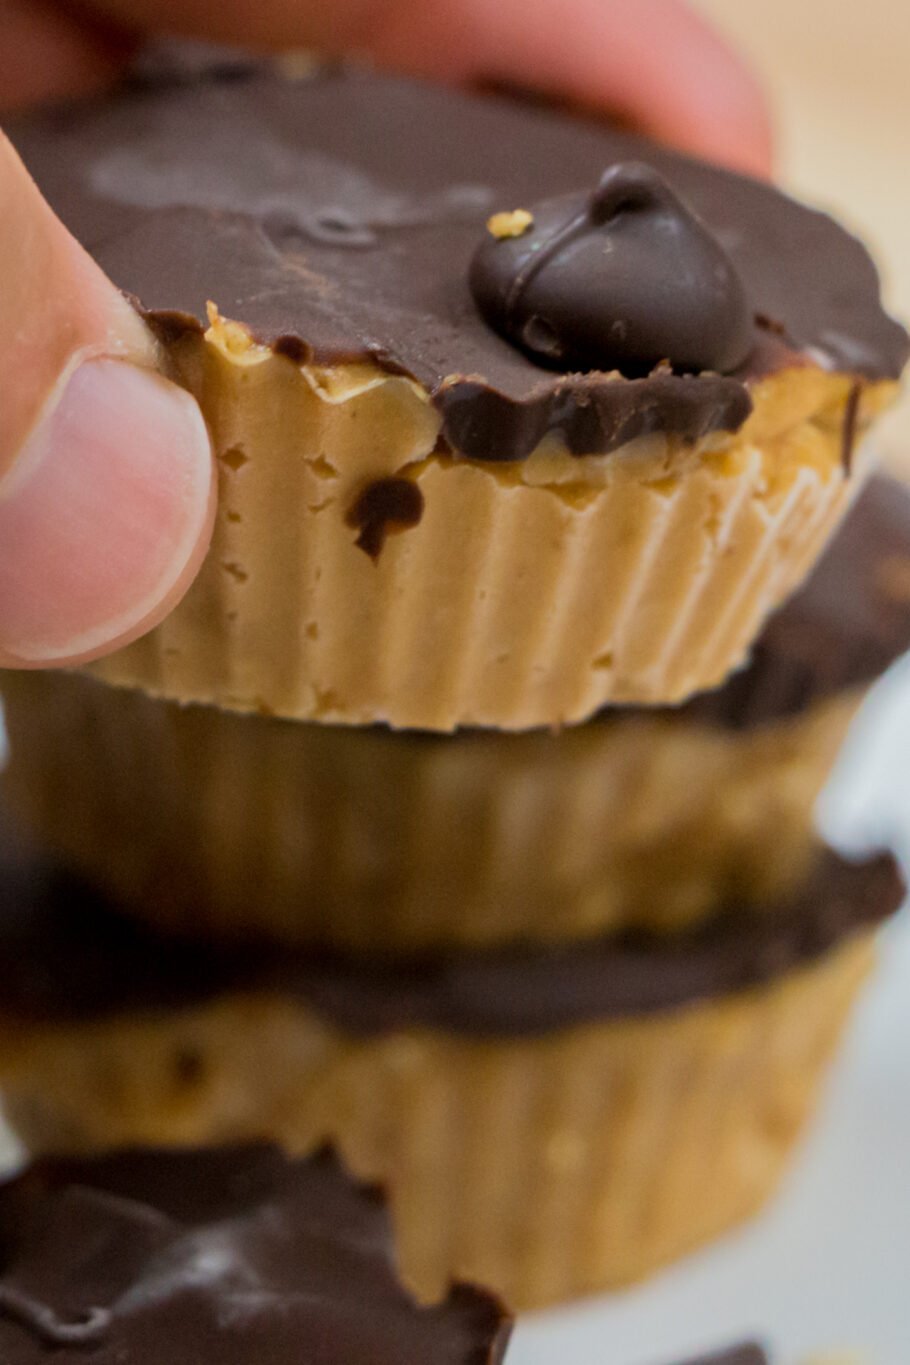 Healthy Protein Peanut Butter Cups - Easy Peasy Meals